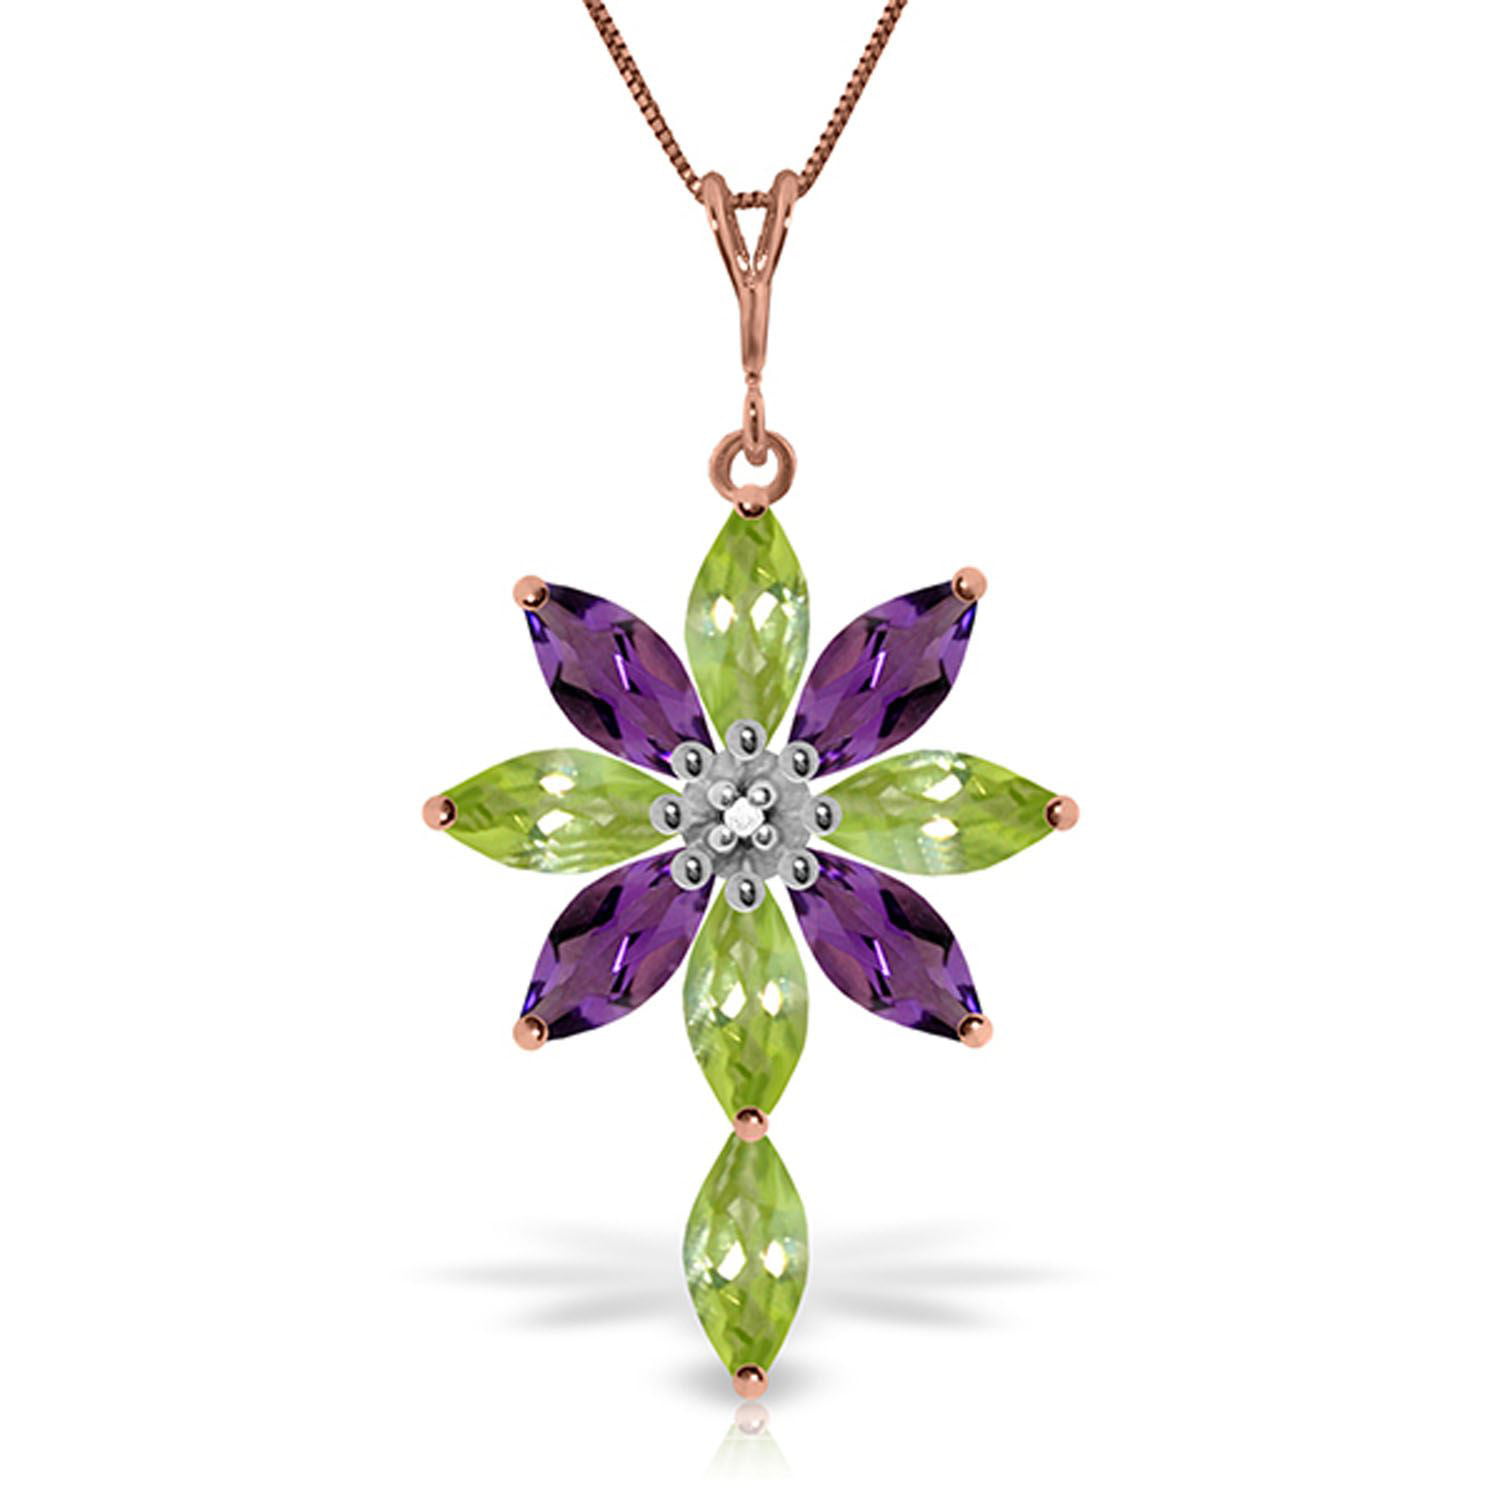 ALARRI 14K Solid Rose Gold Necklace w/ Purple Amethysts & Peridots with 20 Inch Chain Length 